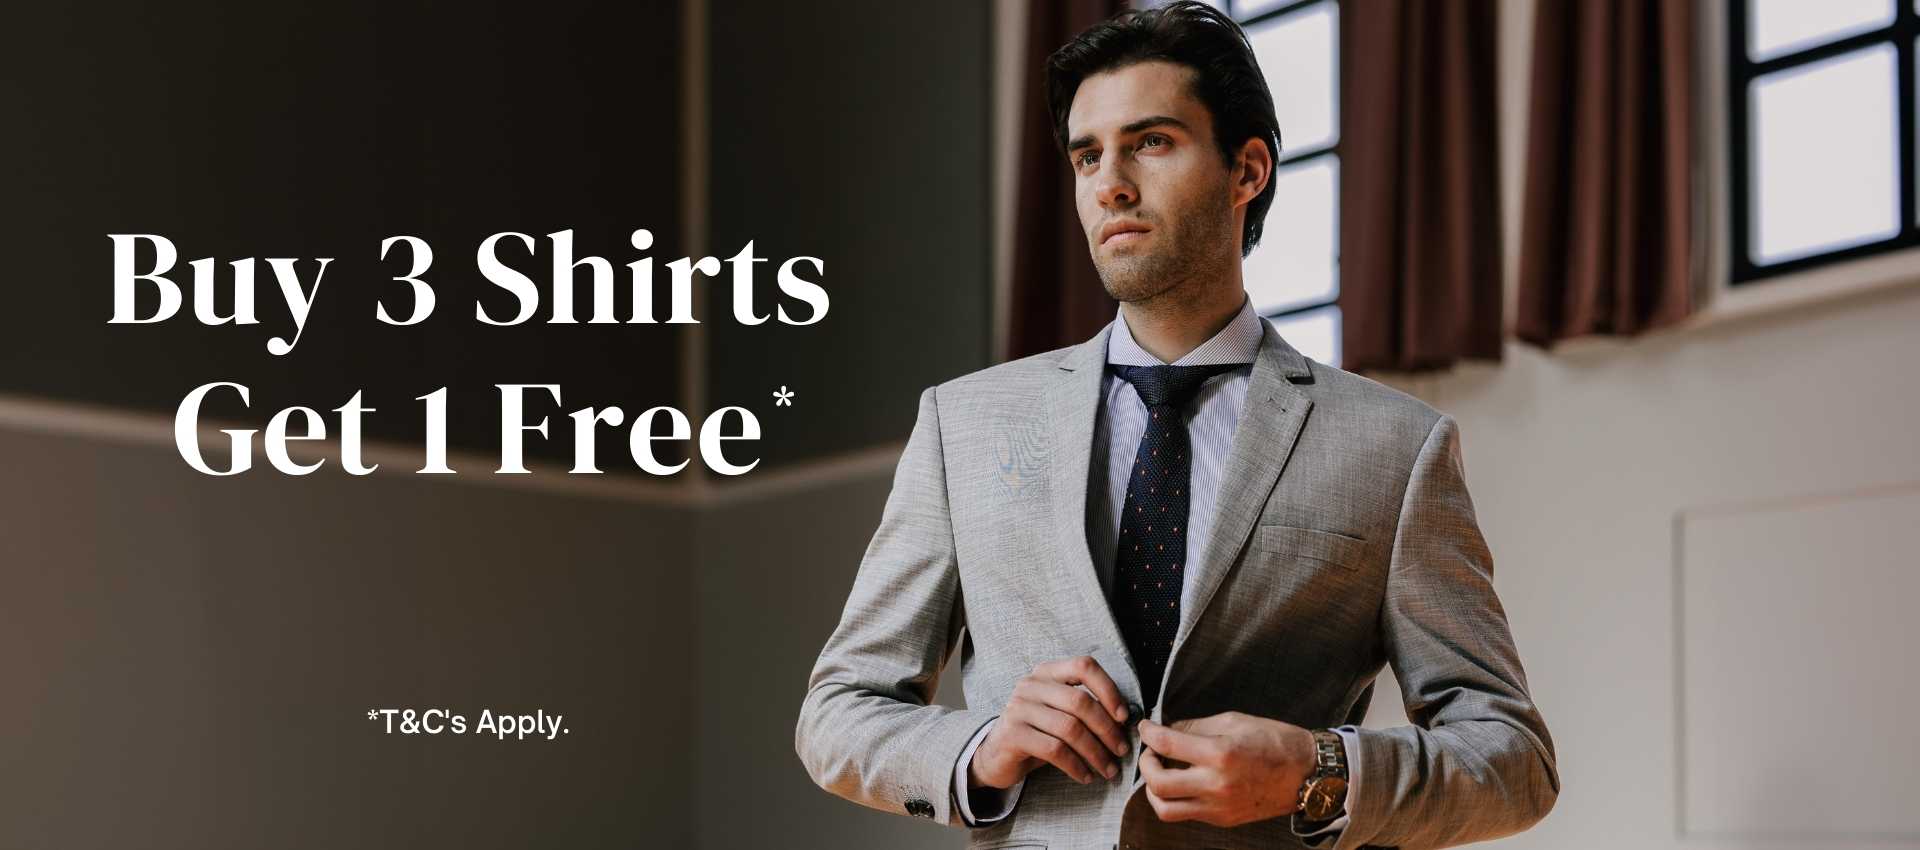 All Dress Shirts for Men from Dandy & Son. Image of man wearing a Extreme cutaway collar shirt with classic blue and white thin stripes from Dandy & Son. With a grey suit and navy tie